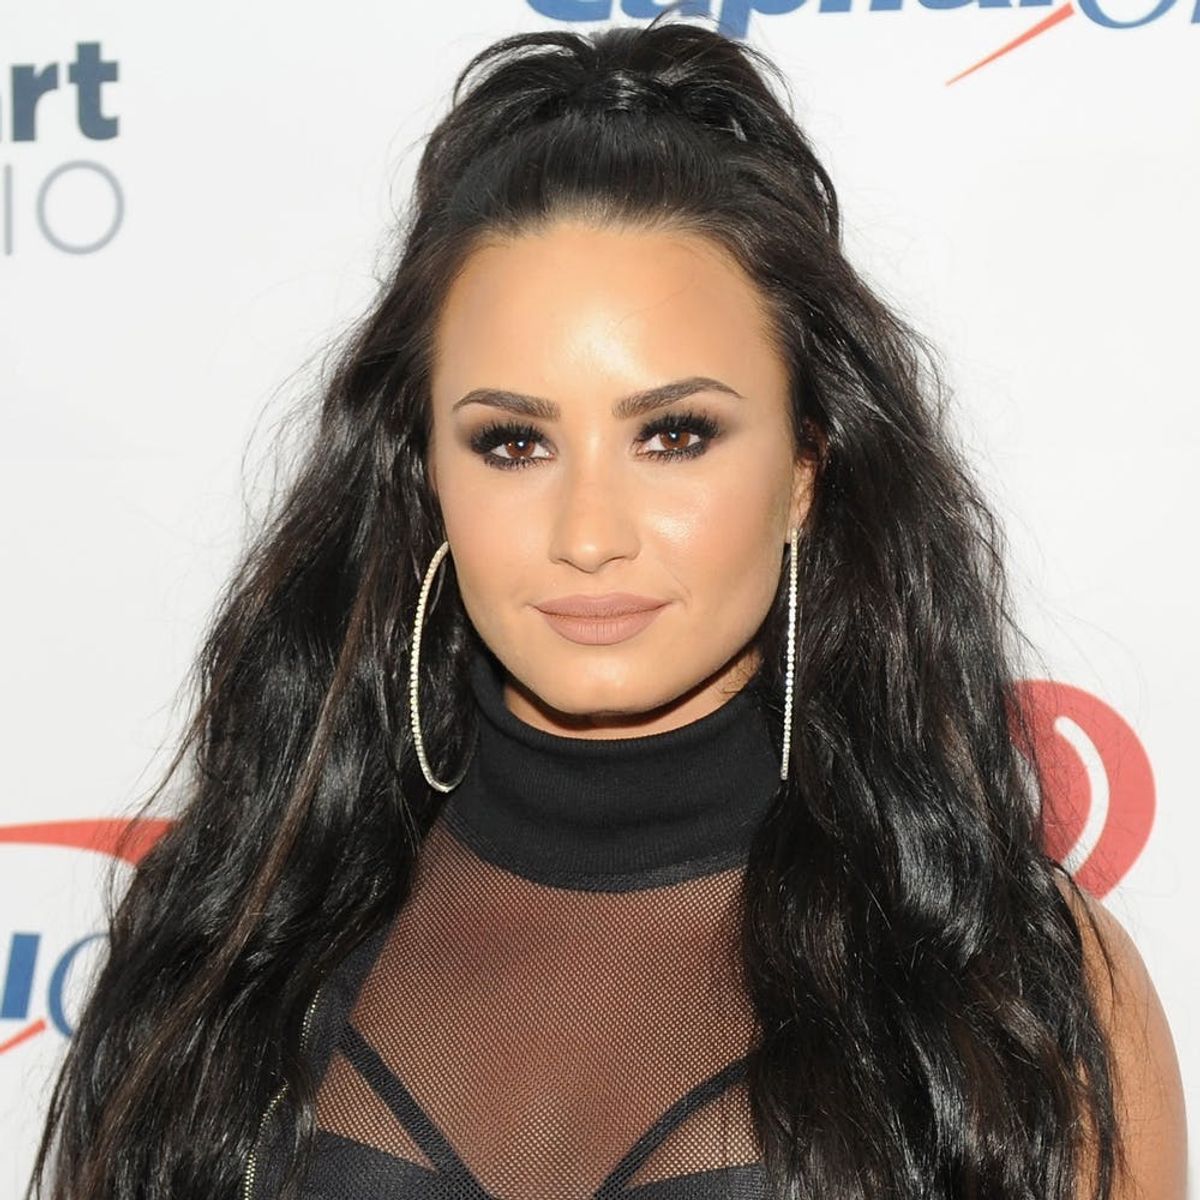 Demi Lovato Reveals How She’s ‘Taken Away the Power’ from the Haters